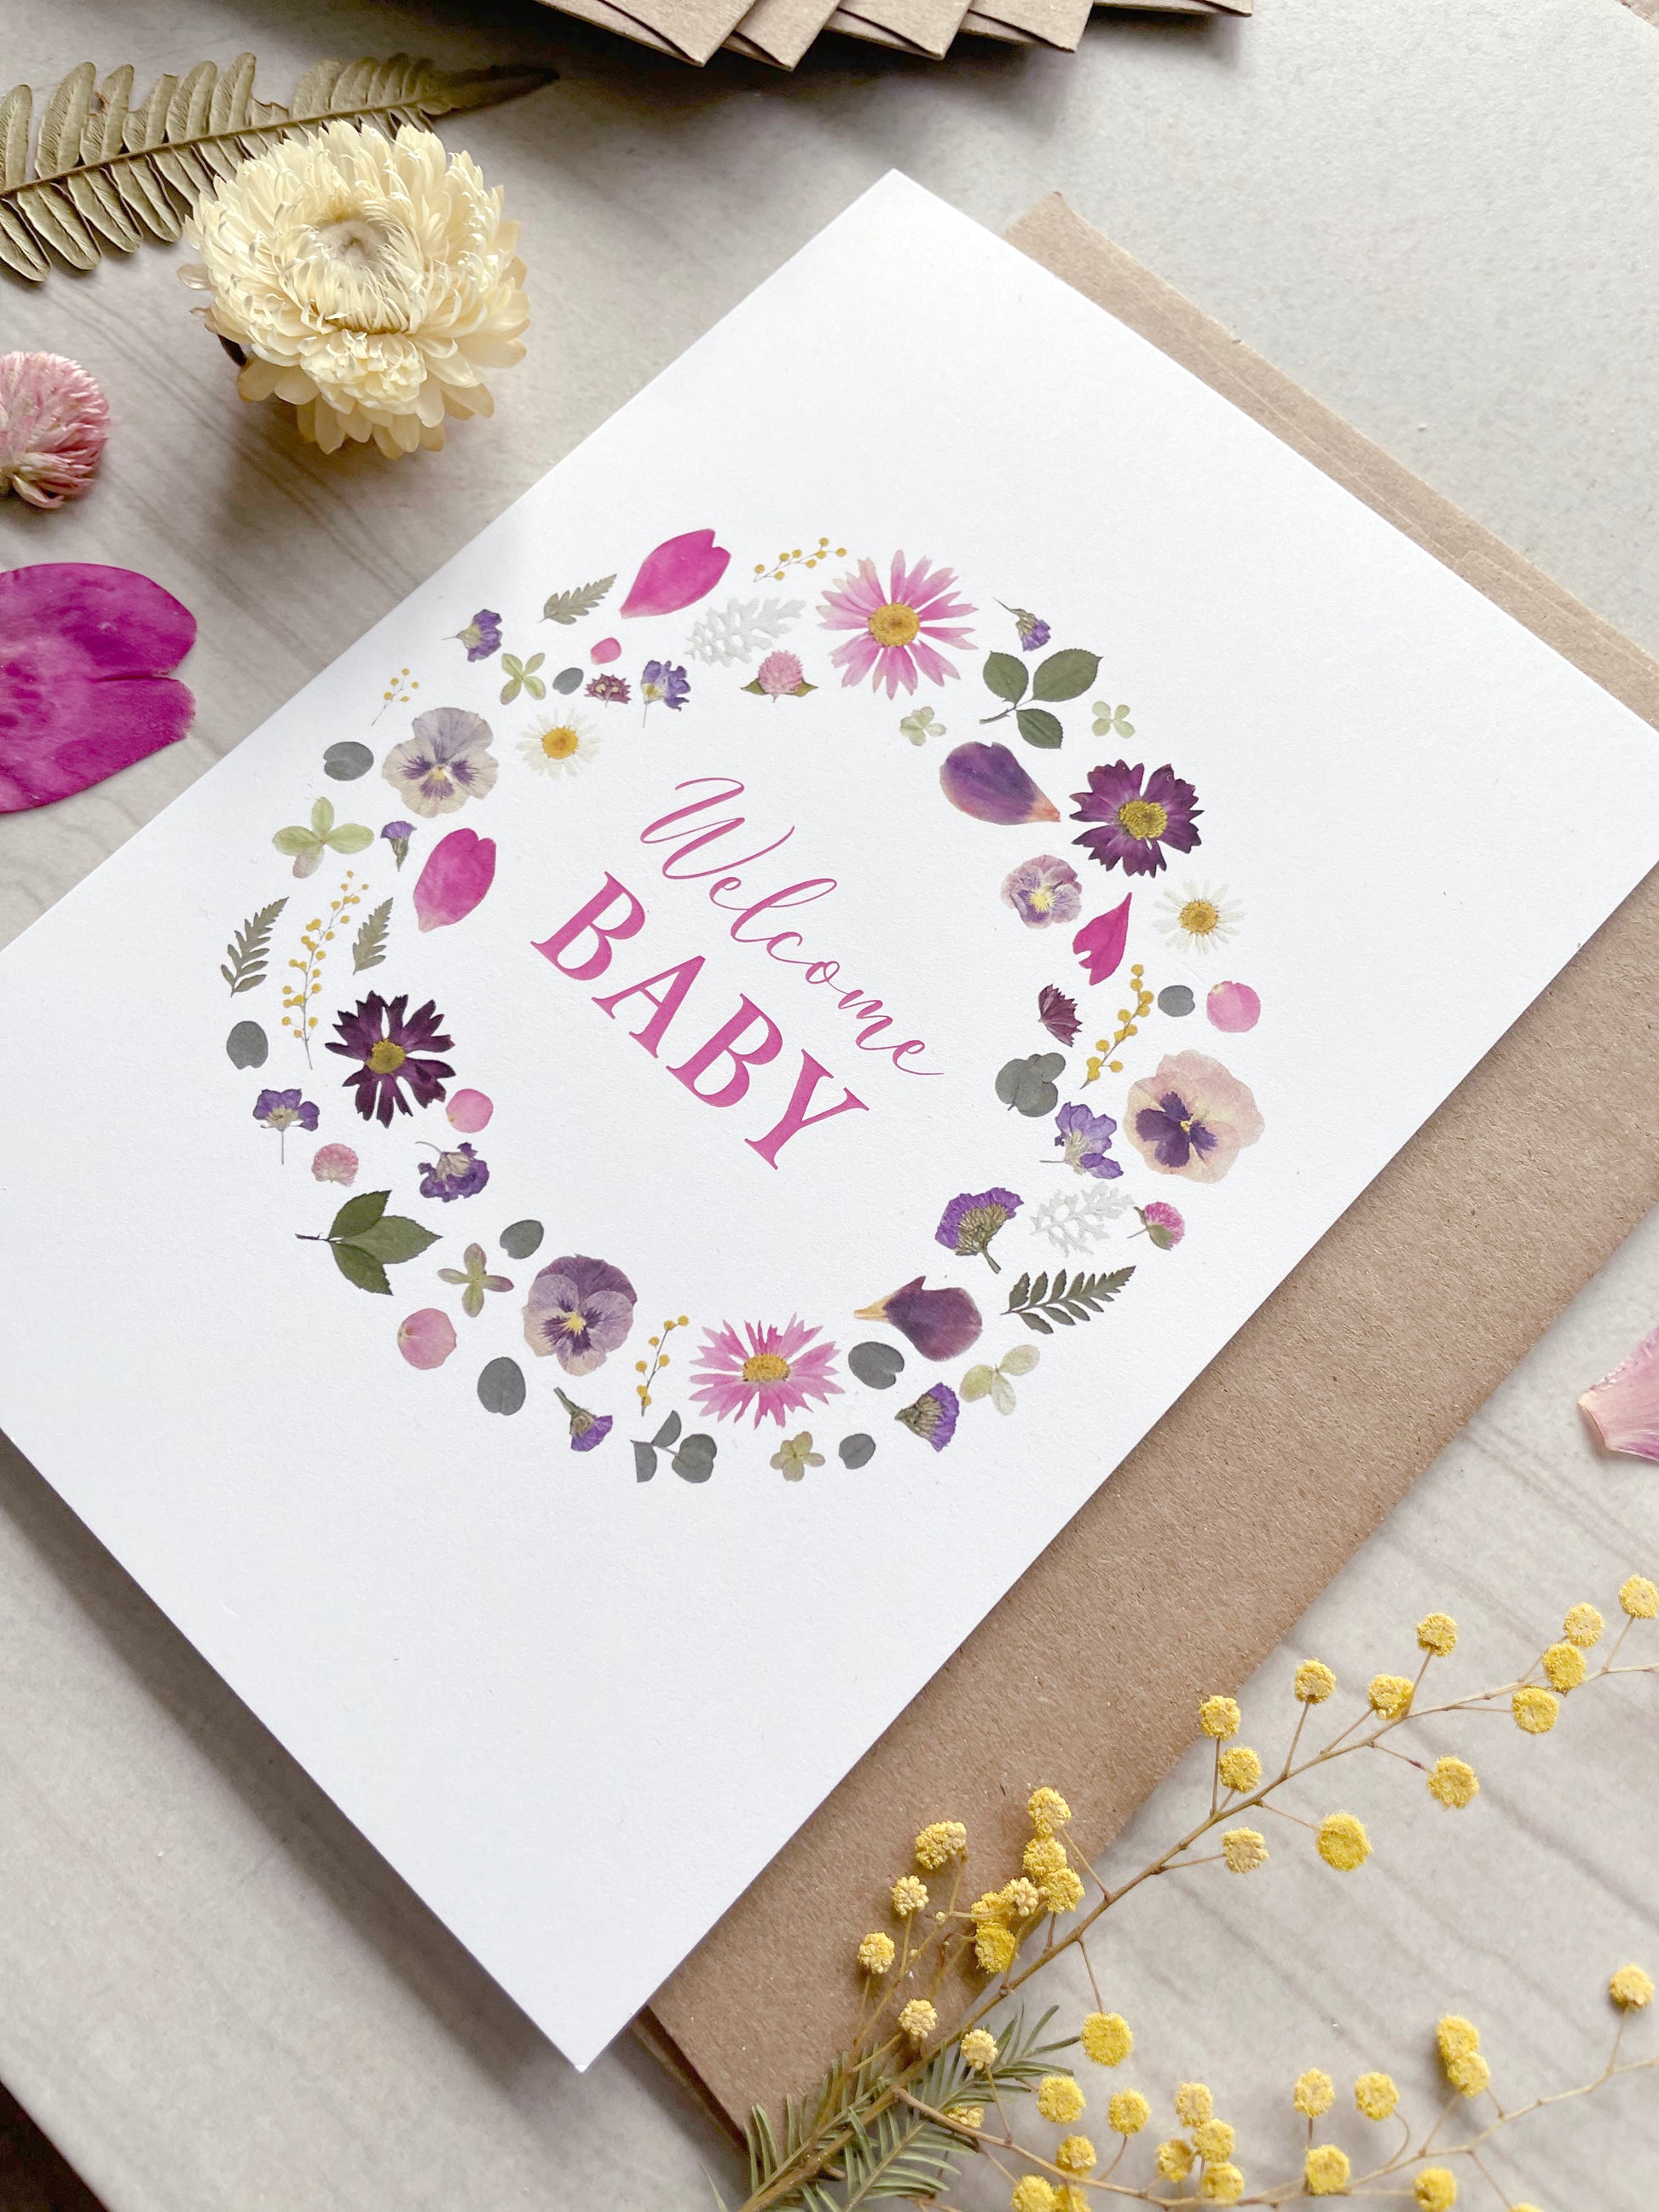 welcome baby card with pink and purple pressed flowers